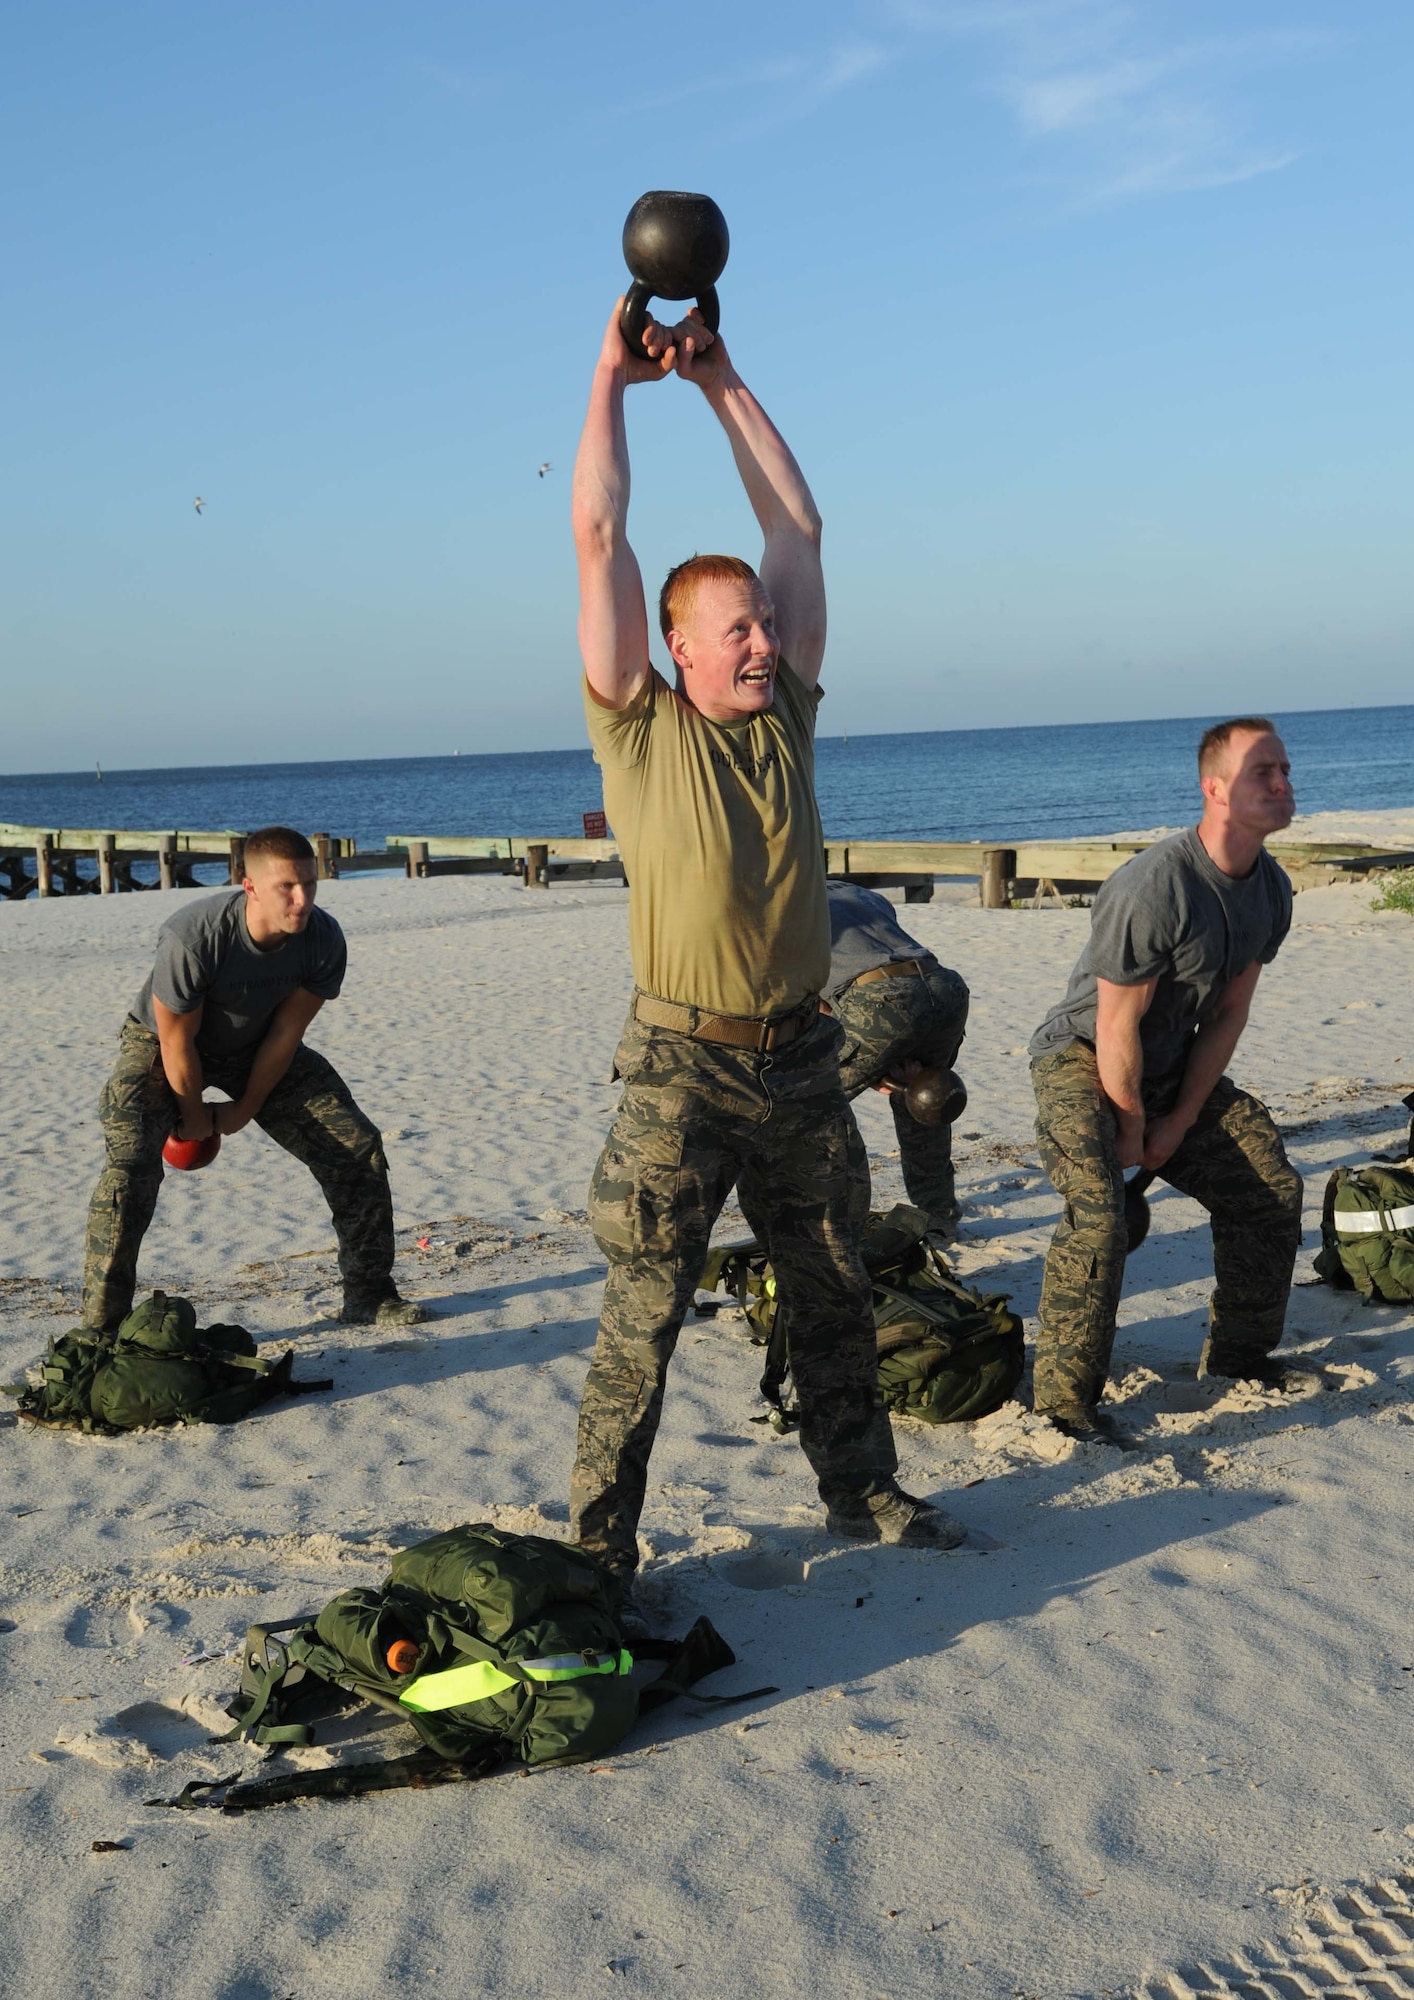 Second Lt. Eric Soderberg, 334th Training Squadron, lifts a kettlebell over his head during the combat controllers’ physical training session April 12, 2013, on Biloxi beach.  Combat controllers are ground troops who are embedded with special forces teams and provide close-air support for special forces units. While at Keesler, trainees learn how to run, swim, carry a rucksack and conduct air traffic control. These Airmen are prepared physically and mentally for the demands of the combat controller pipeline while earning air traffic control certification in just 15 weeks.  (U.S. Air Force photo by Kemberly Groue)